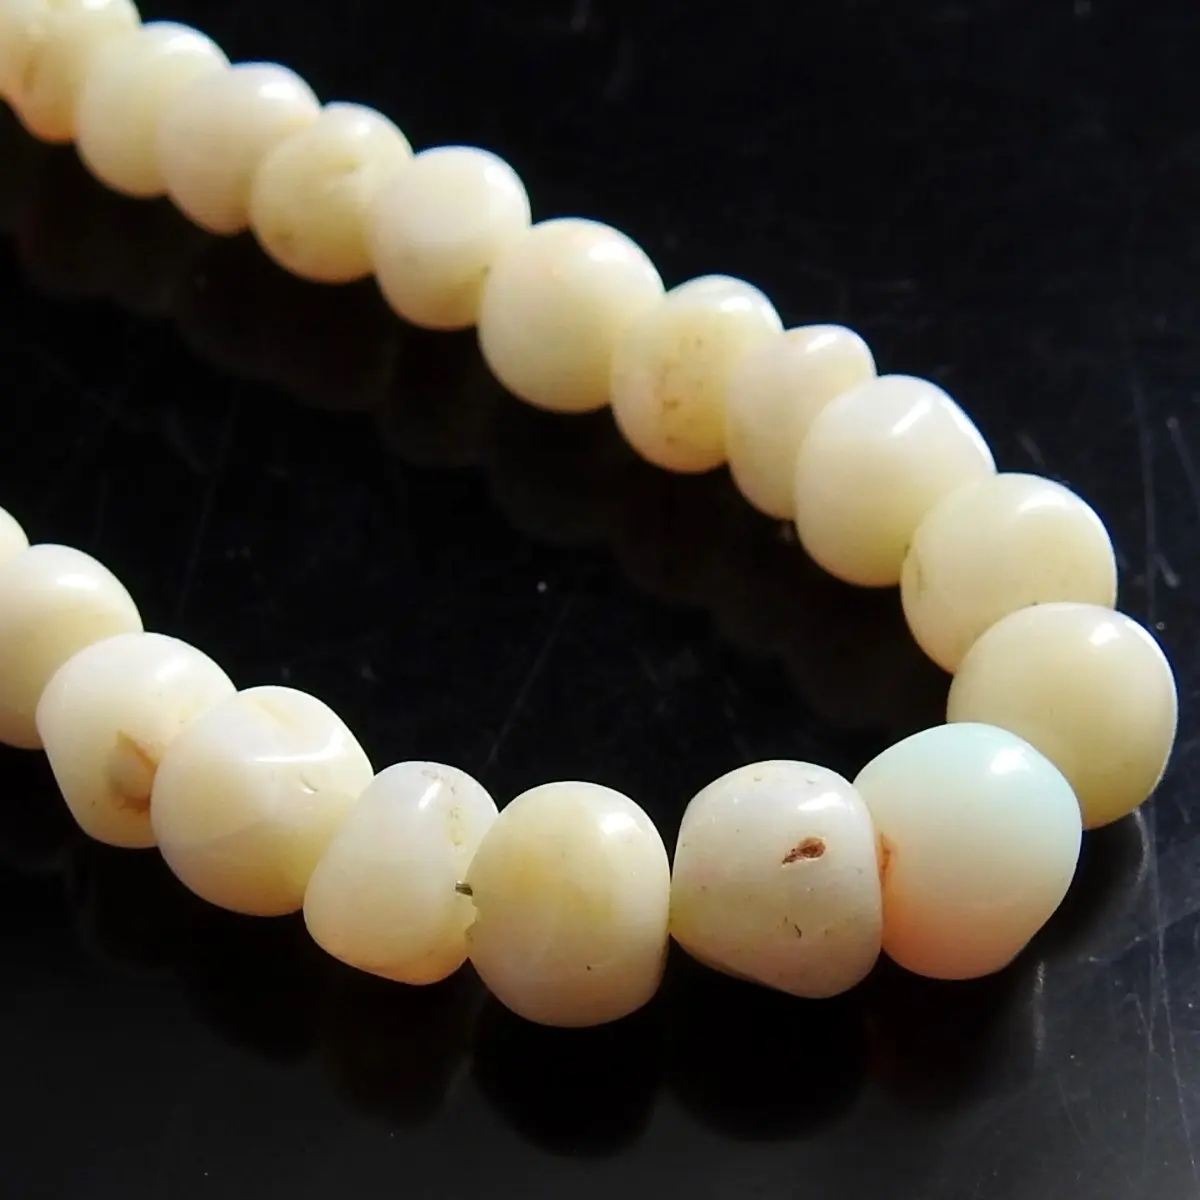 Australian Opal Smooth Roundel Beads/Handmade Loose Stone/16Inches 4To7MM Approx/100 % Natural/Wholesale Price/New Arrival